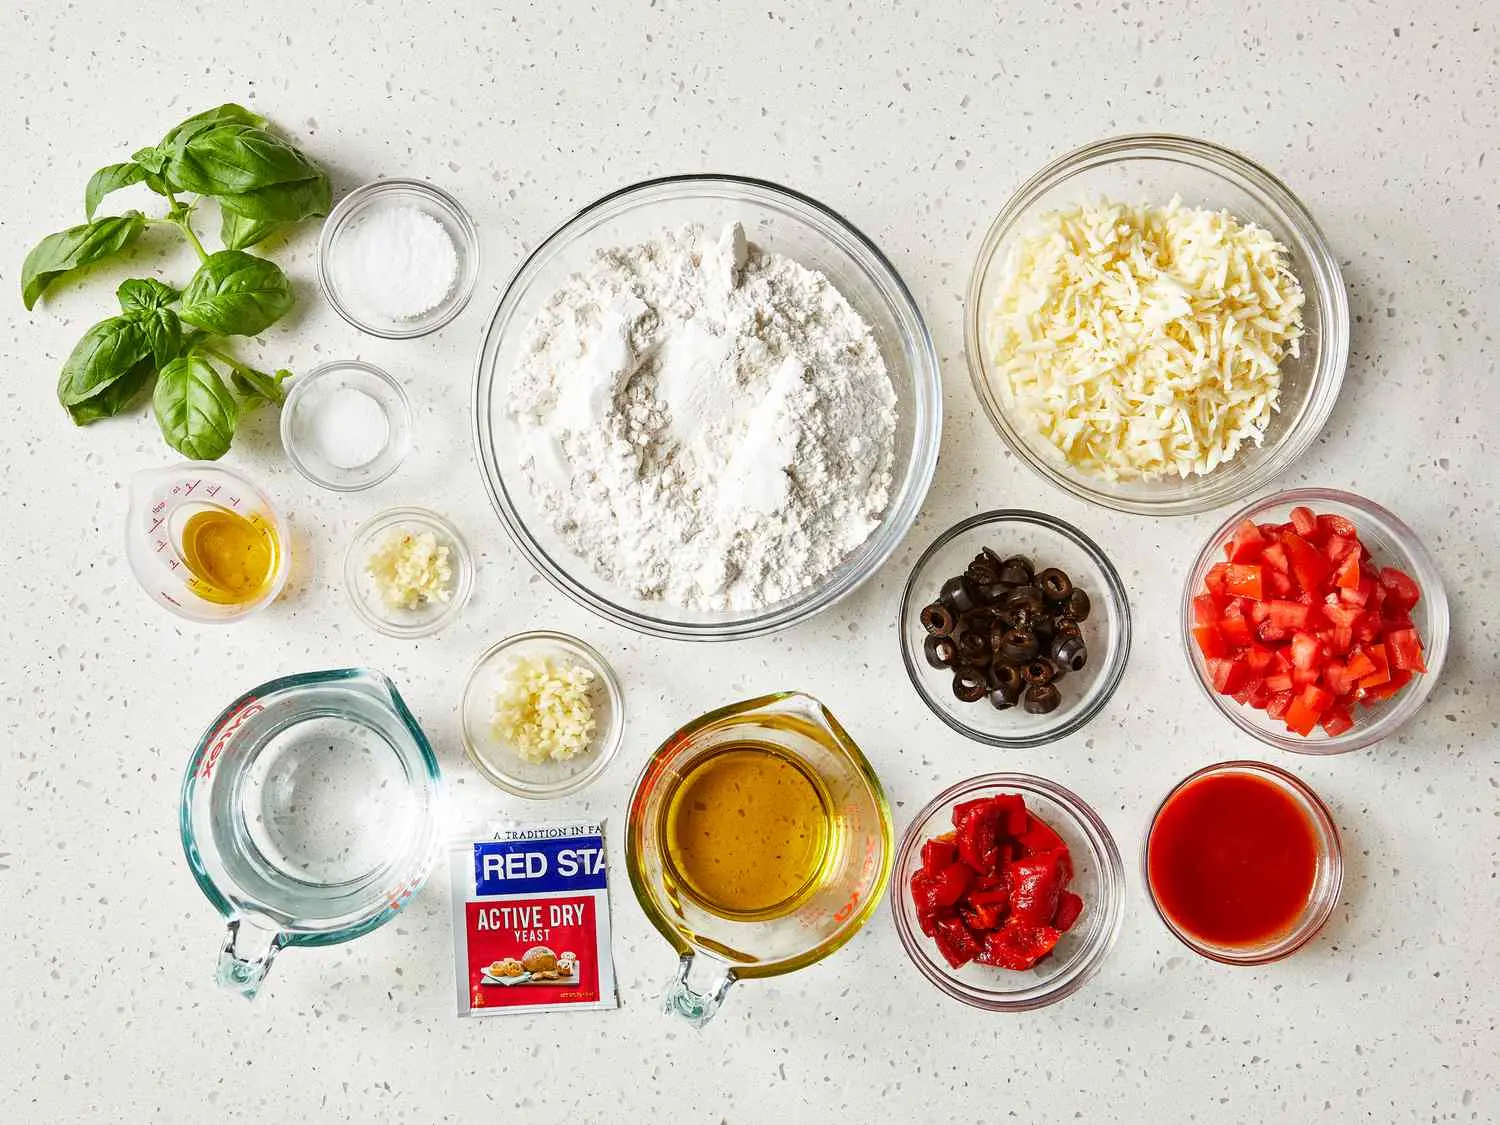 ingredients for pizza - Which ingredients are used in pizza